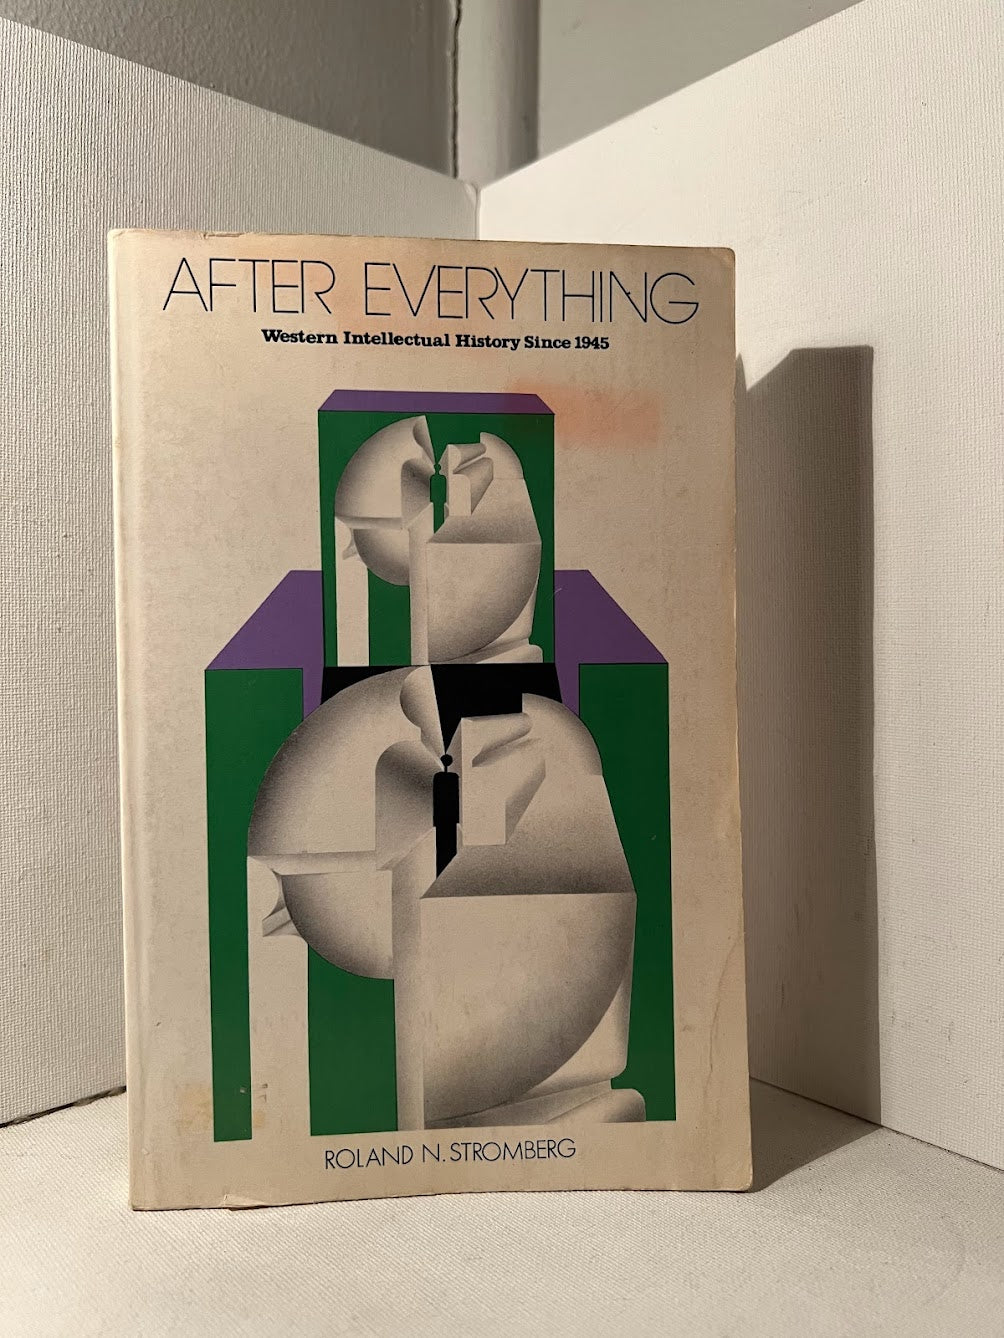 After Everything by Roland Stromberg